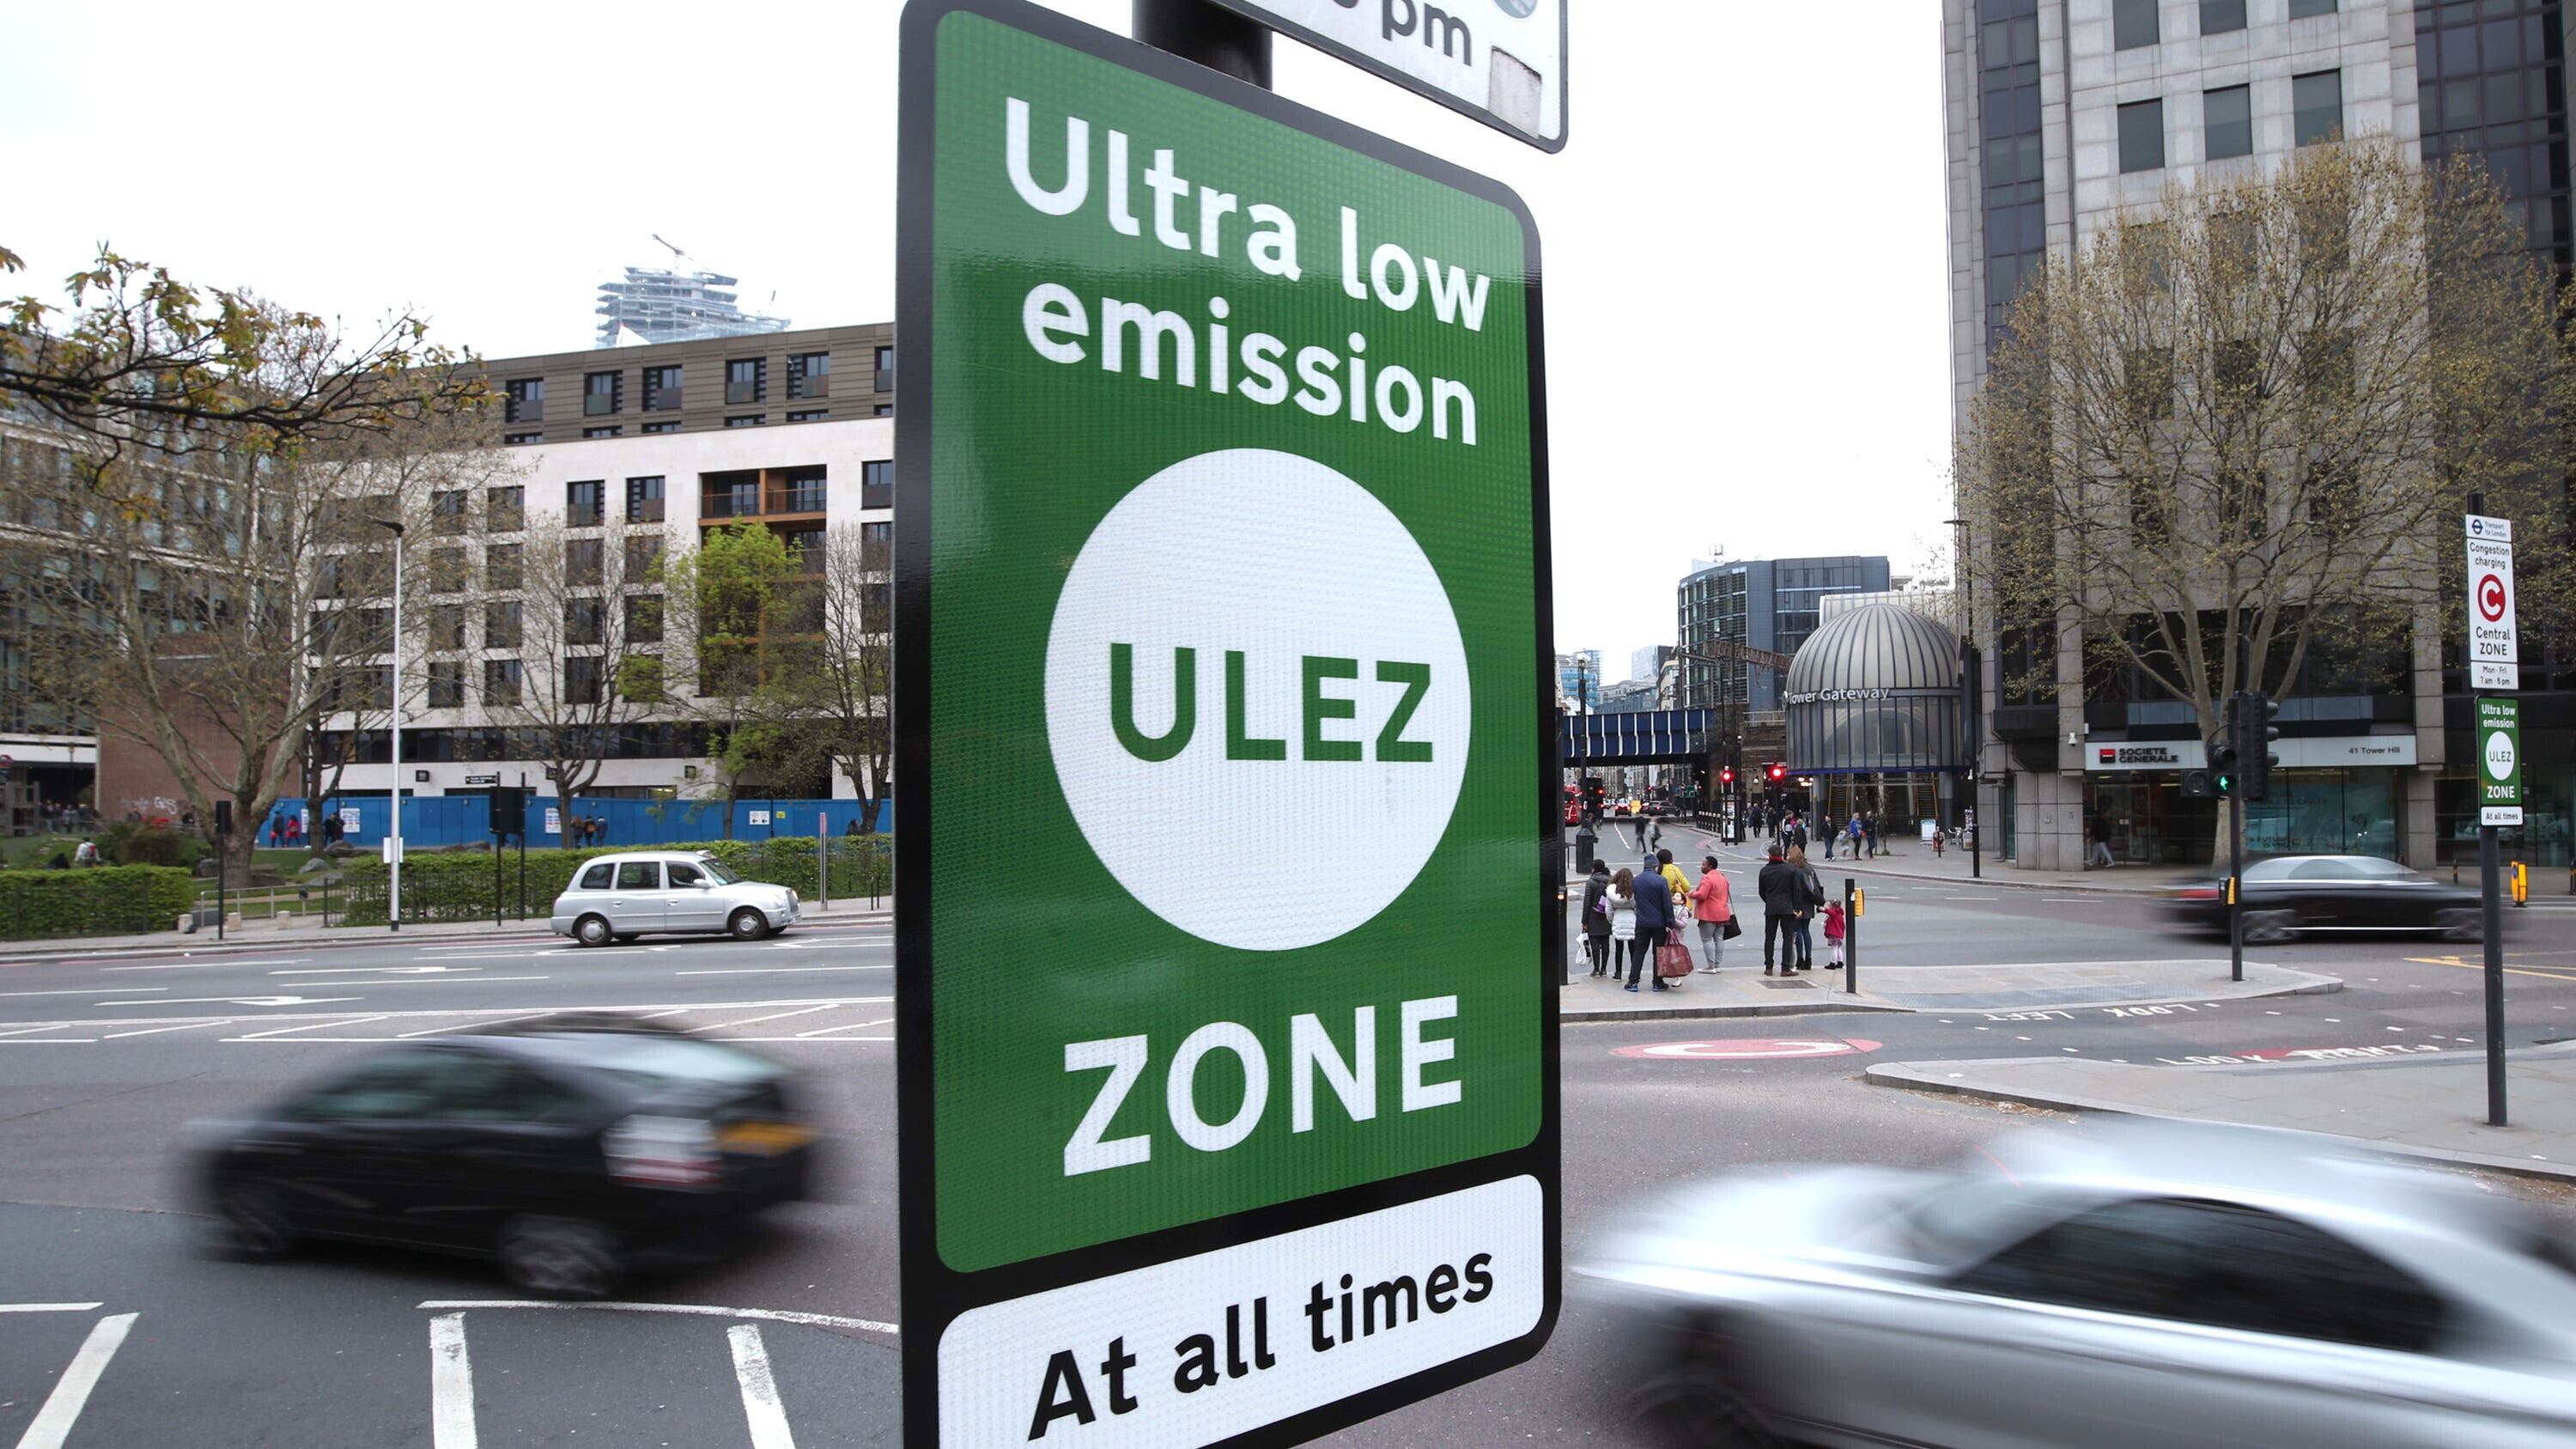 An information sign at Tower Hill in central London for the ultra low emission zone (Ulez) (Yui Mok/PA)